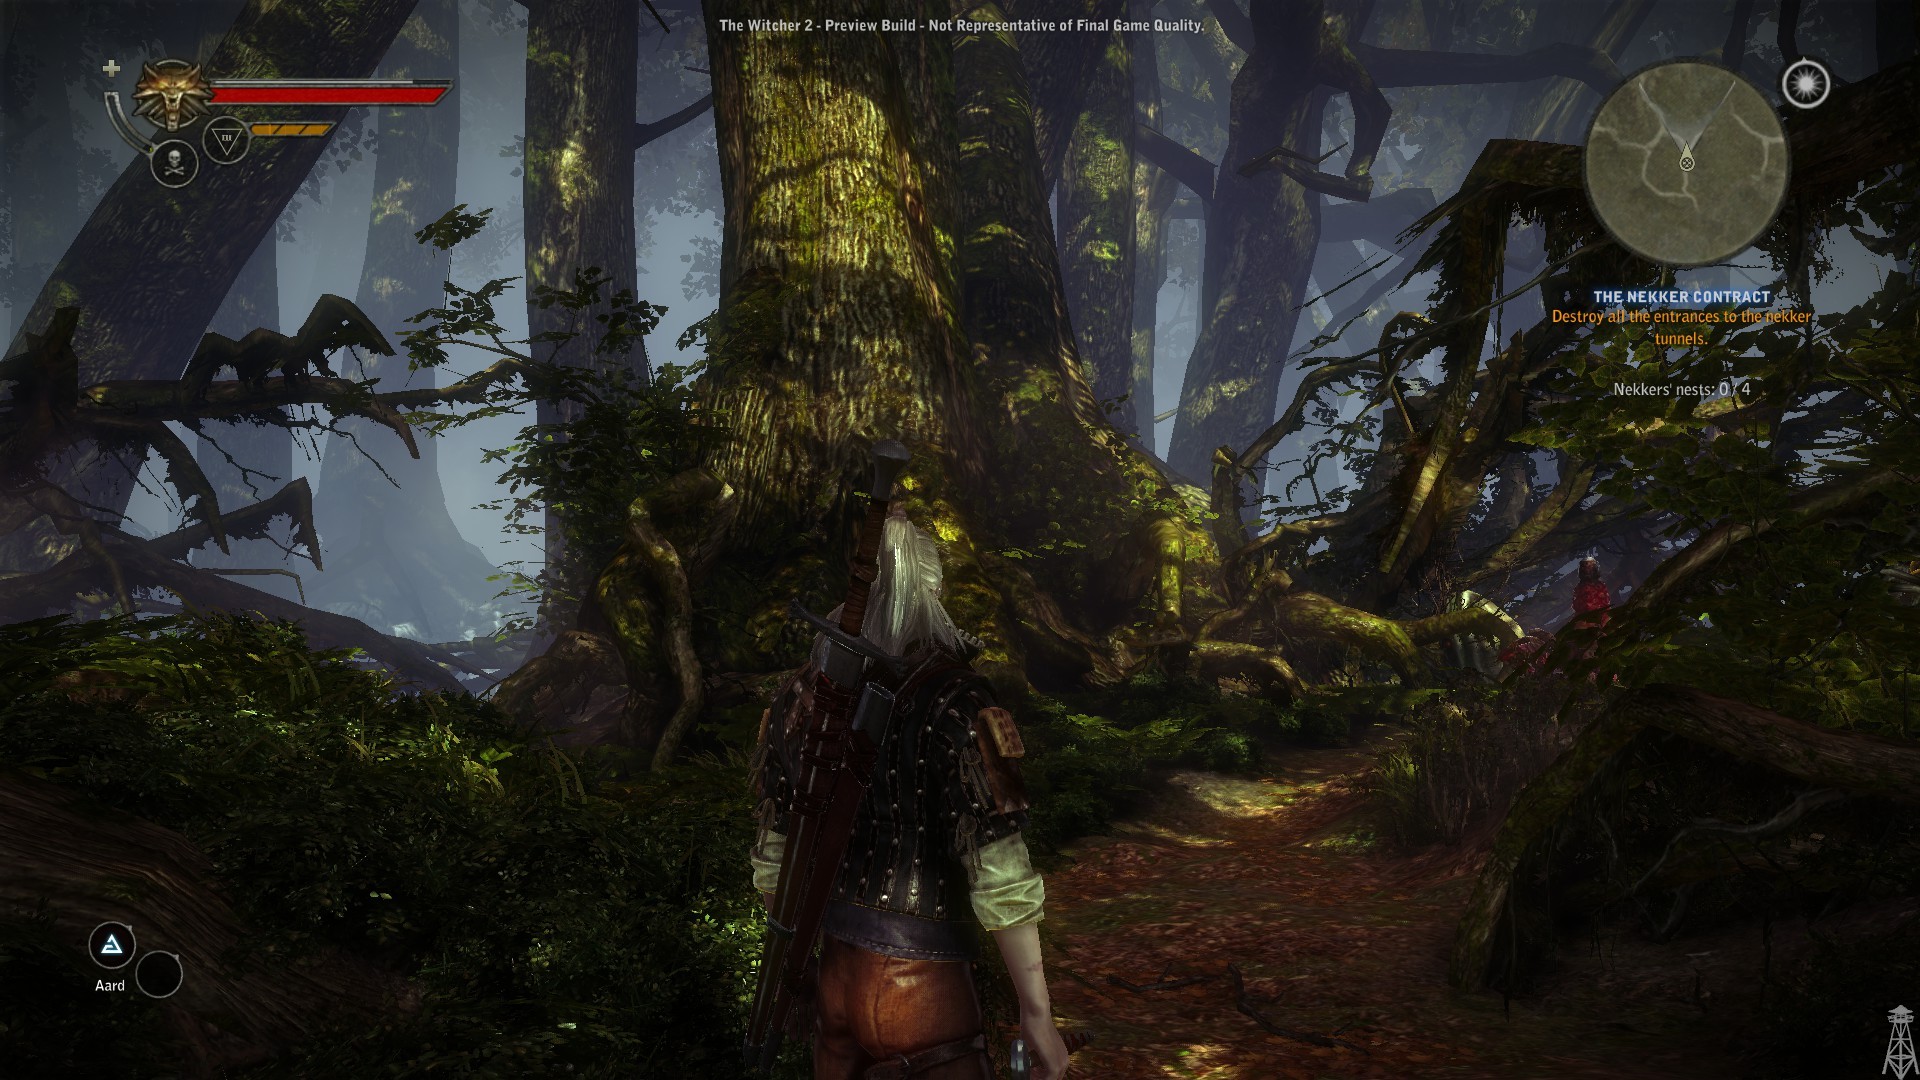 The Witcher 2 - Images.